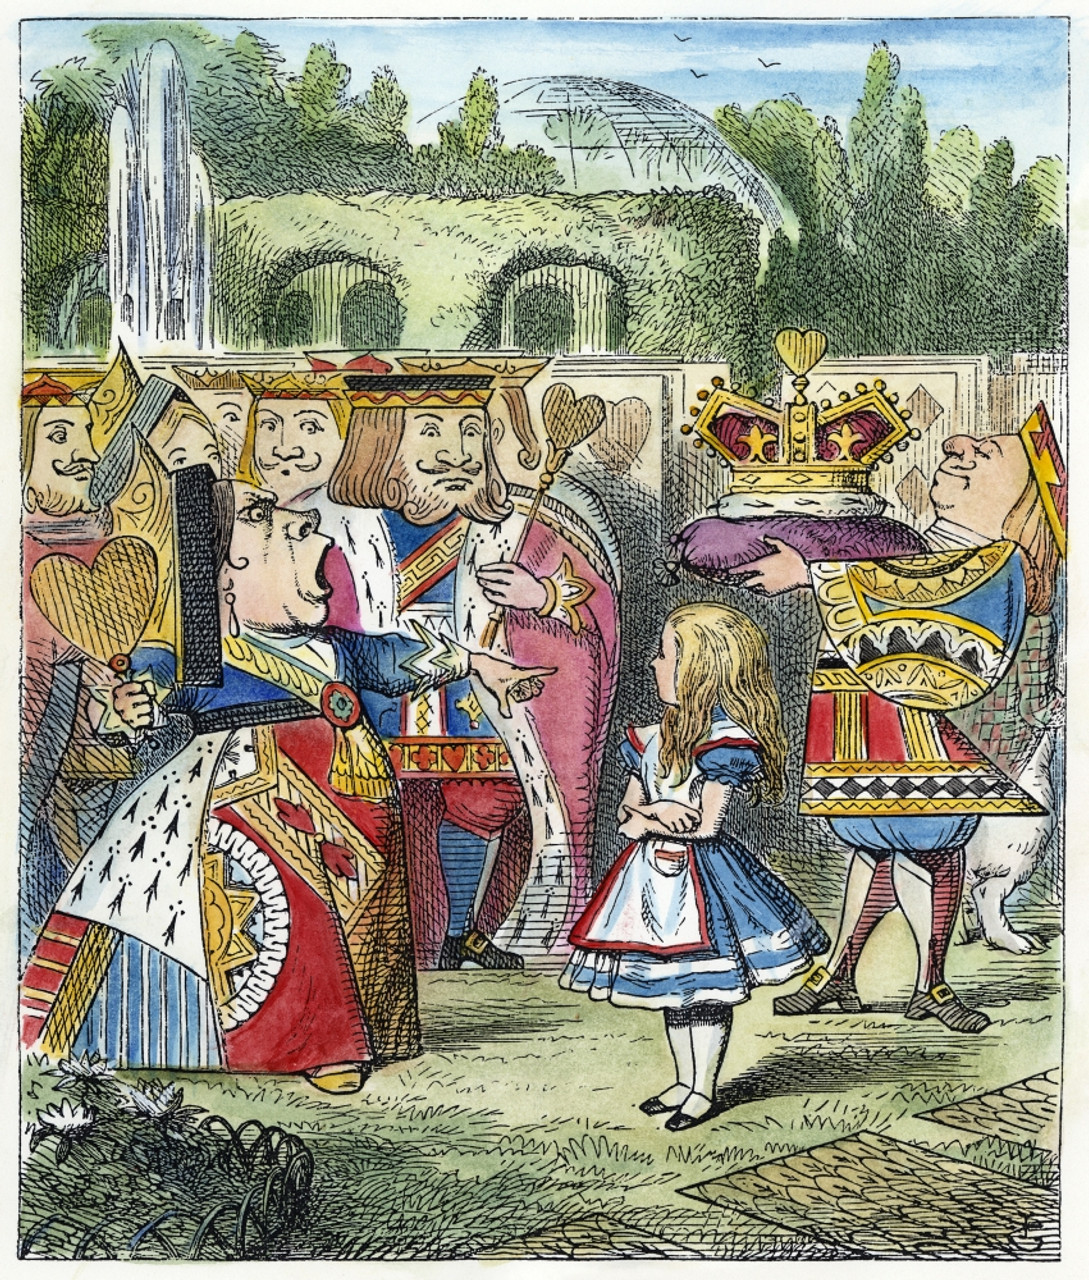  Alice in Wonderland: The Original 1865 Edition With